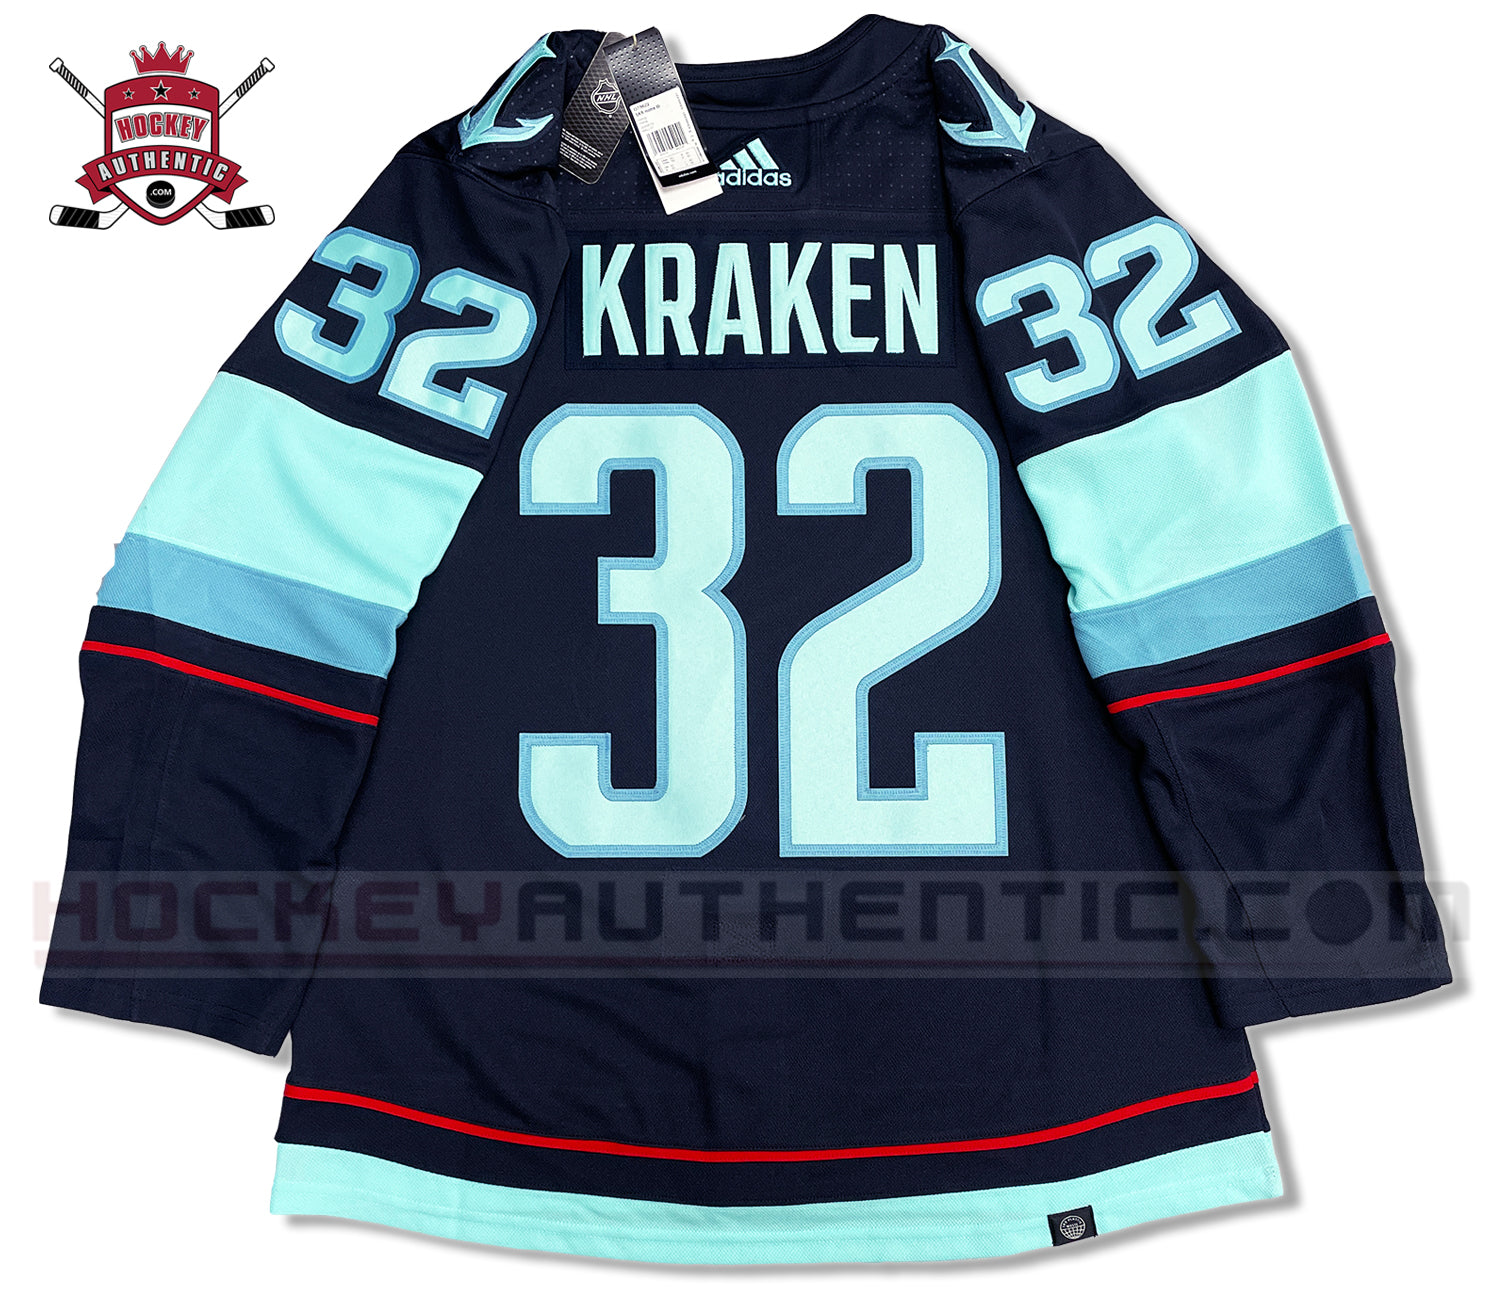 theScore - Are these Seattle Kraken jerseys 🔥 or 🤢? (📸: NHL